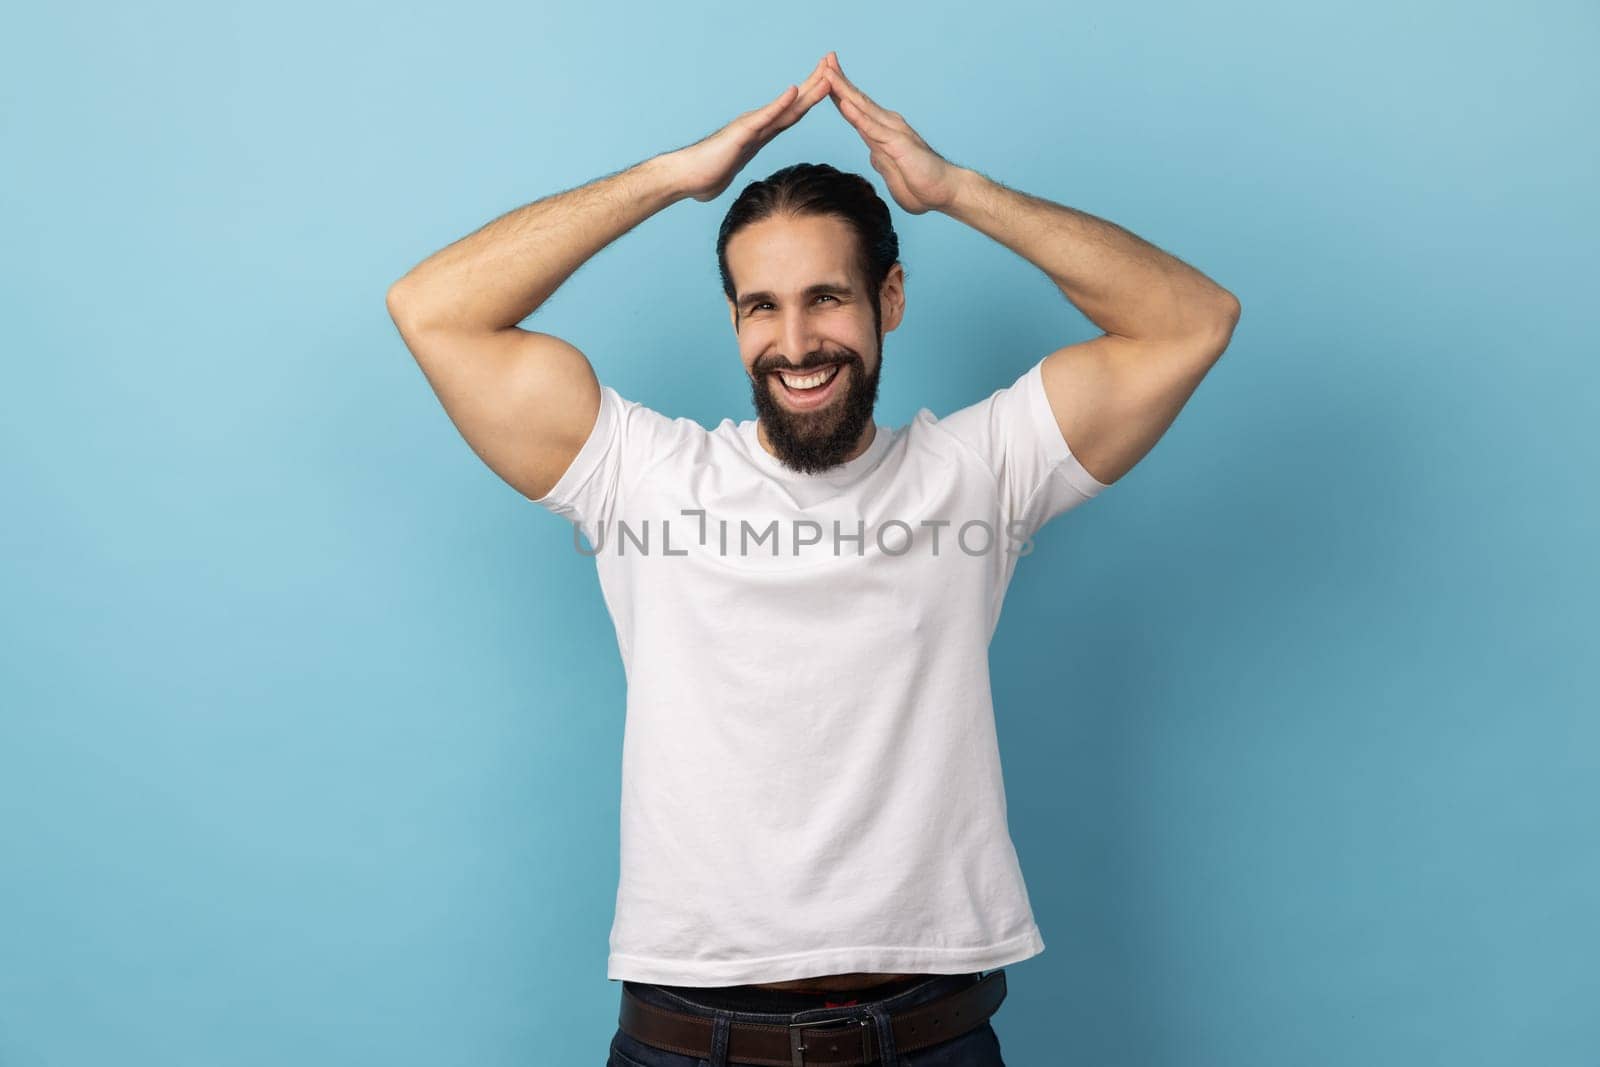 Safety and house insurance. Portrait of man with beard wearing white T-shirt making roof gesture over head and smiling to camera with amiable expression. Indoor studio shot isolated on blue background